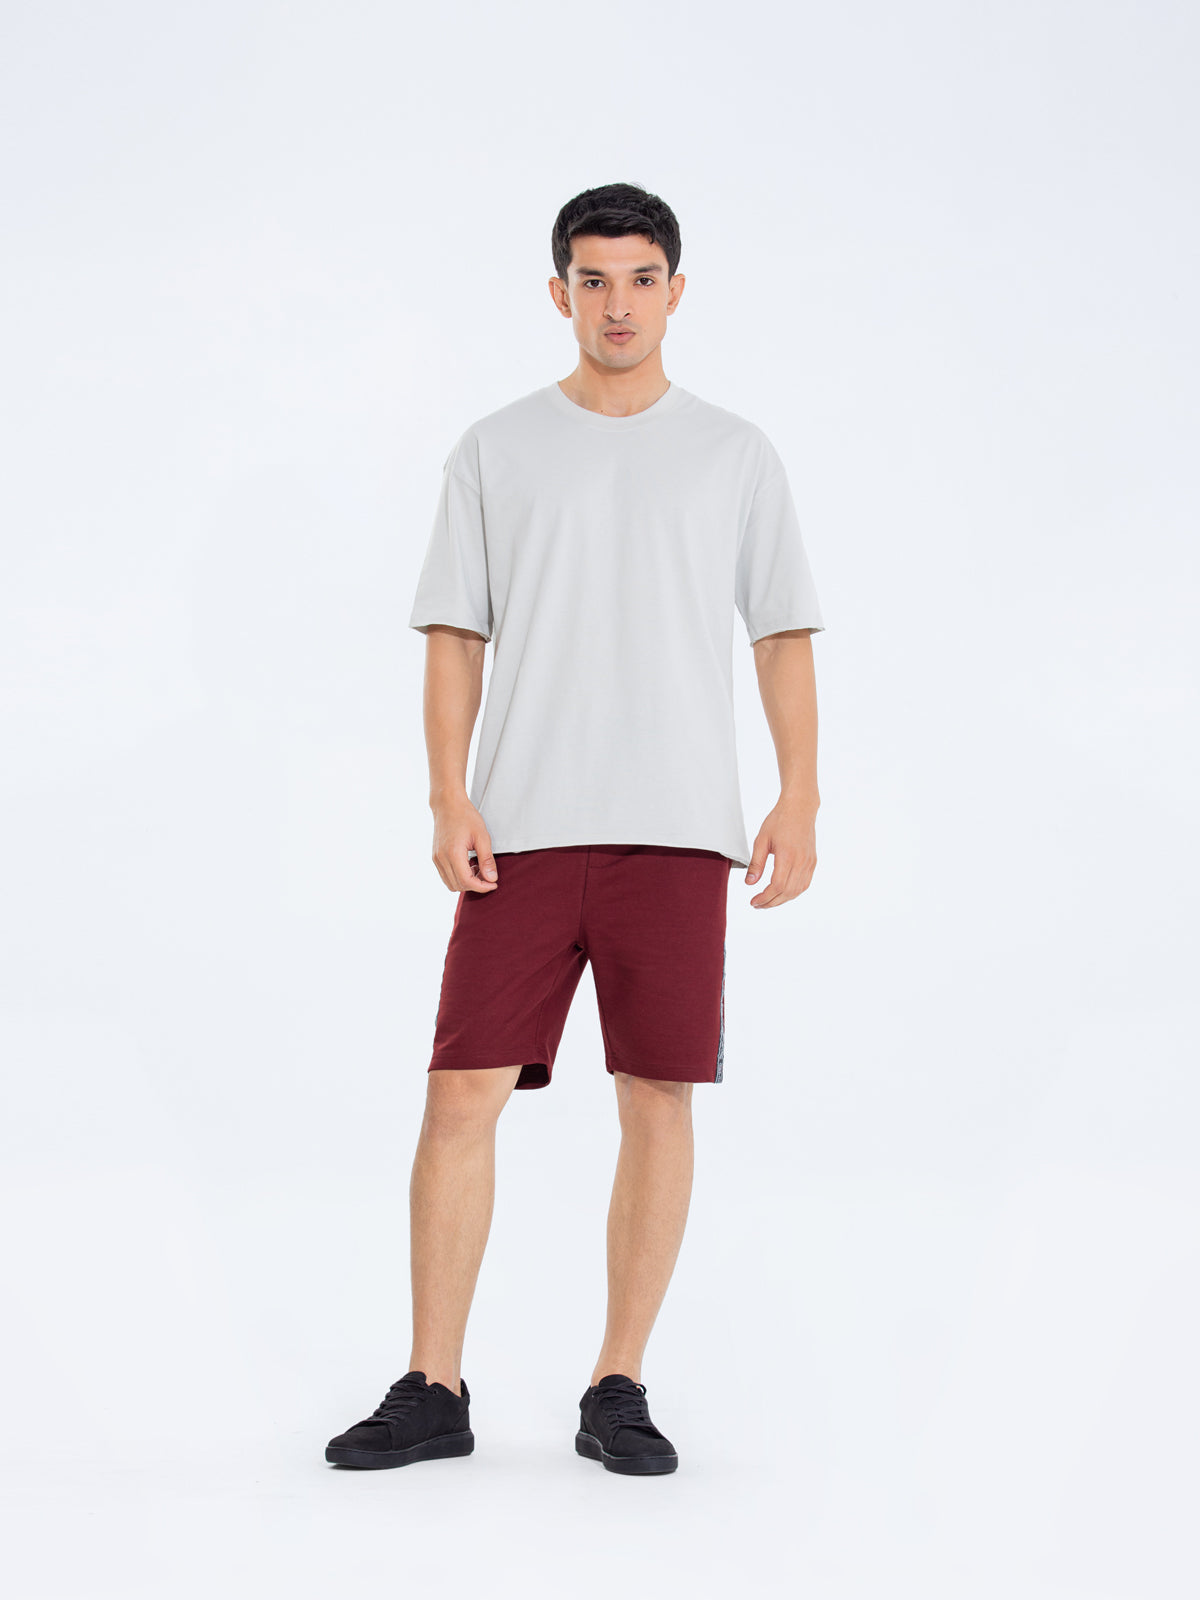 Relaxed Fit Crew Neck Basic Tee - FMTBL24-011